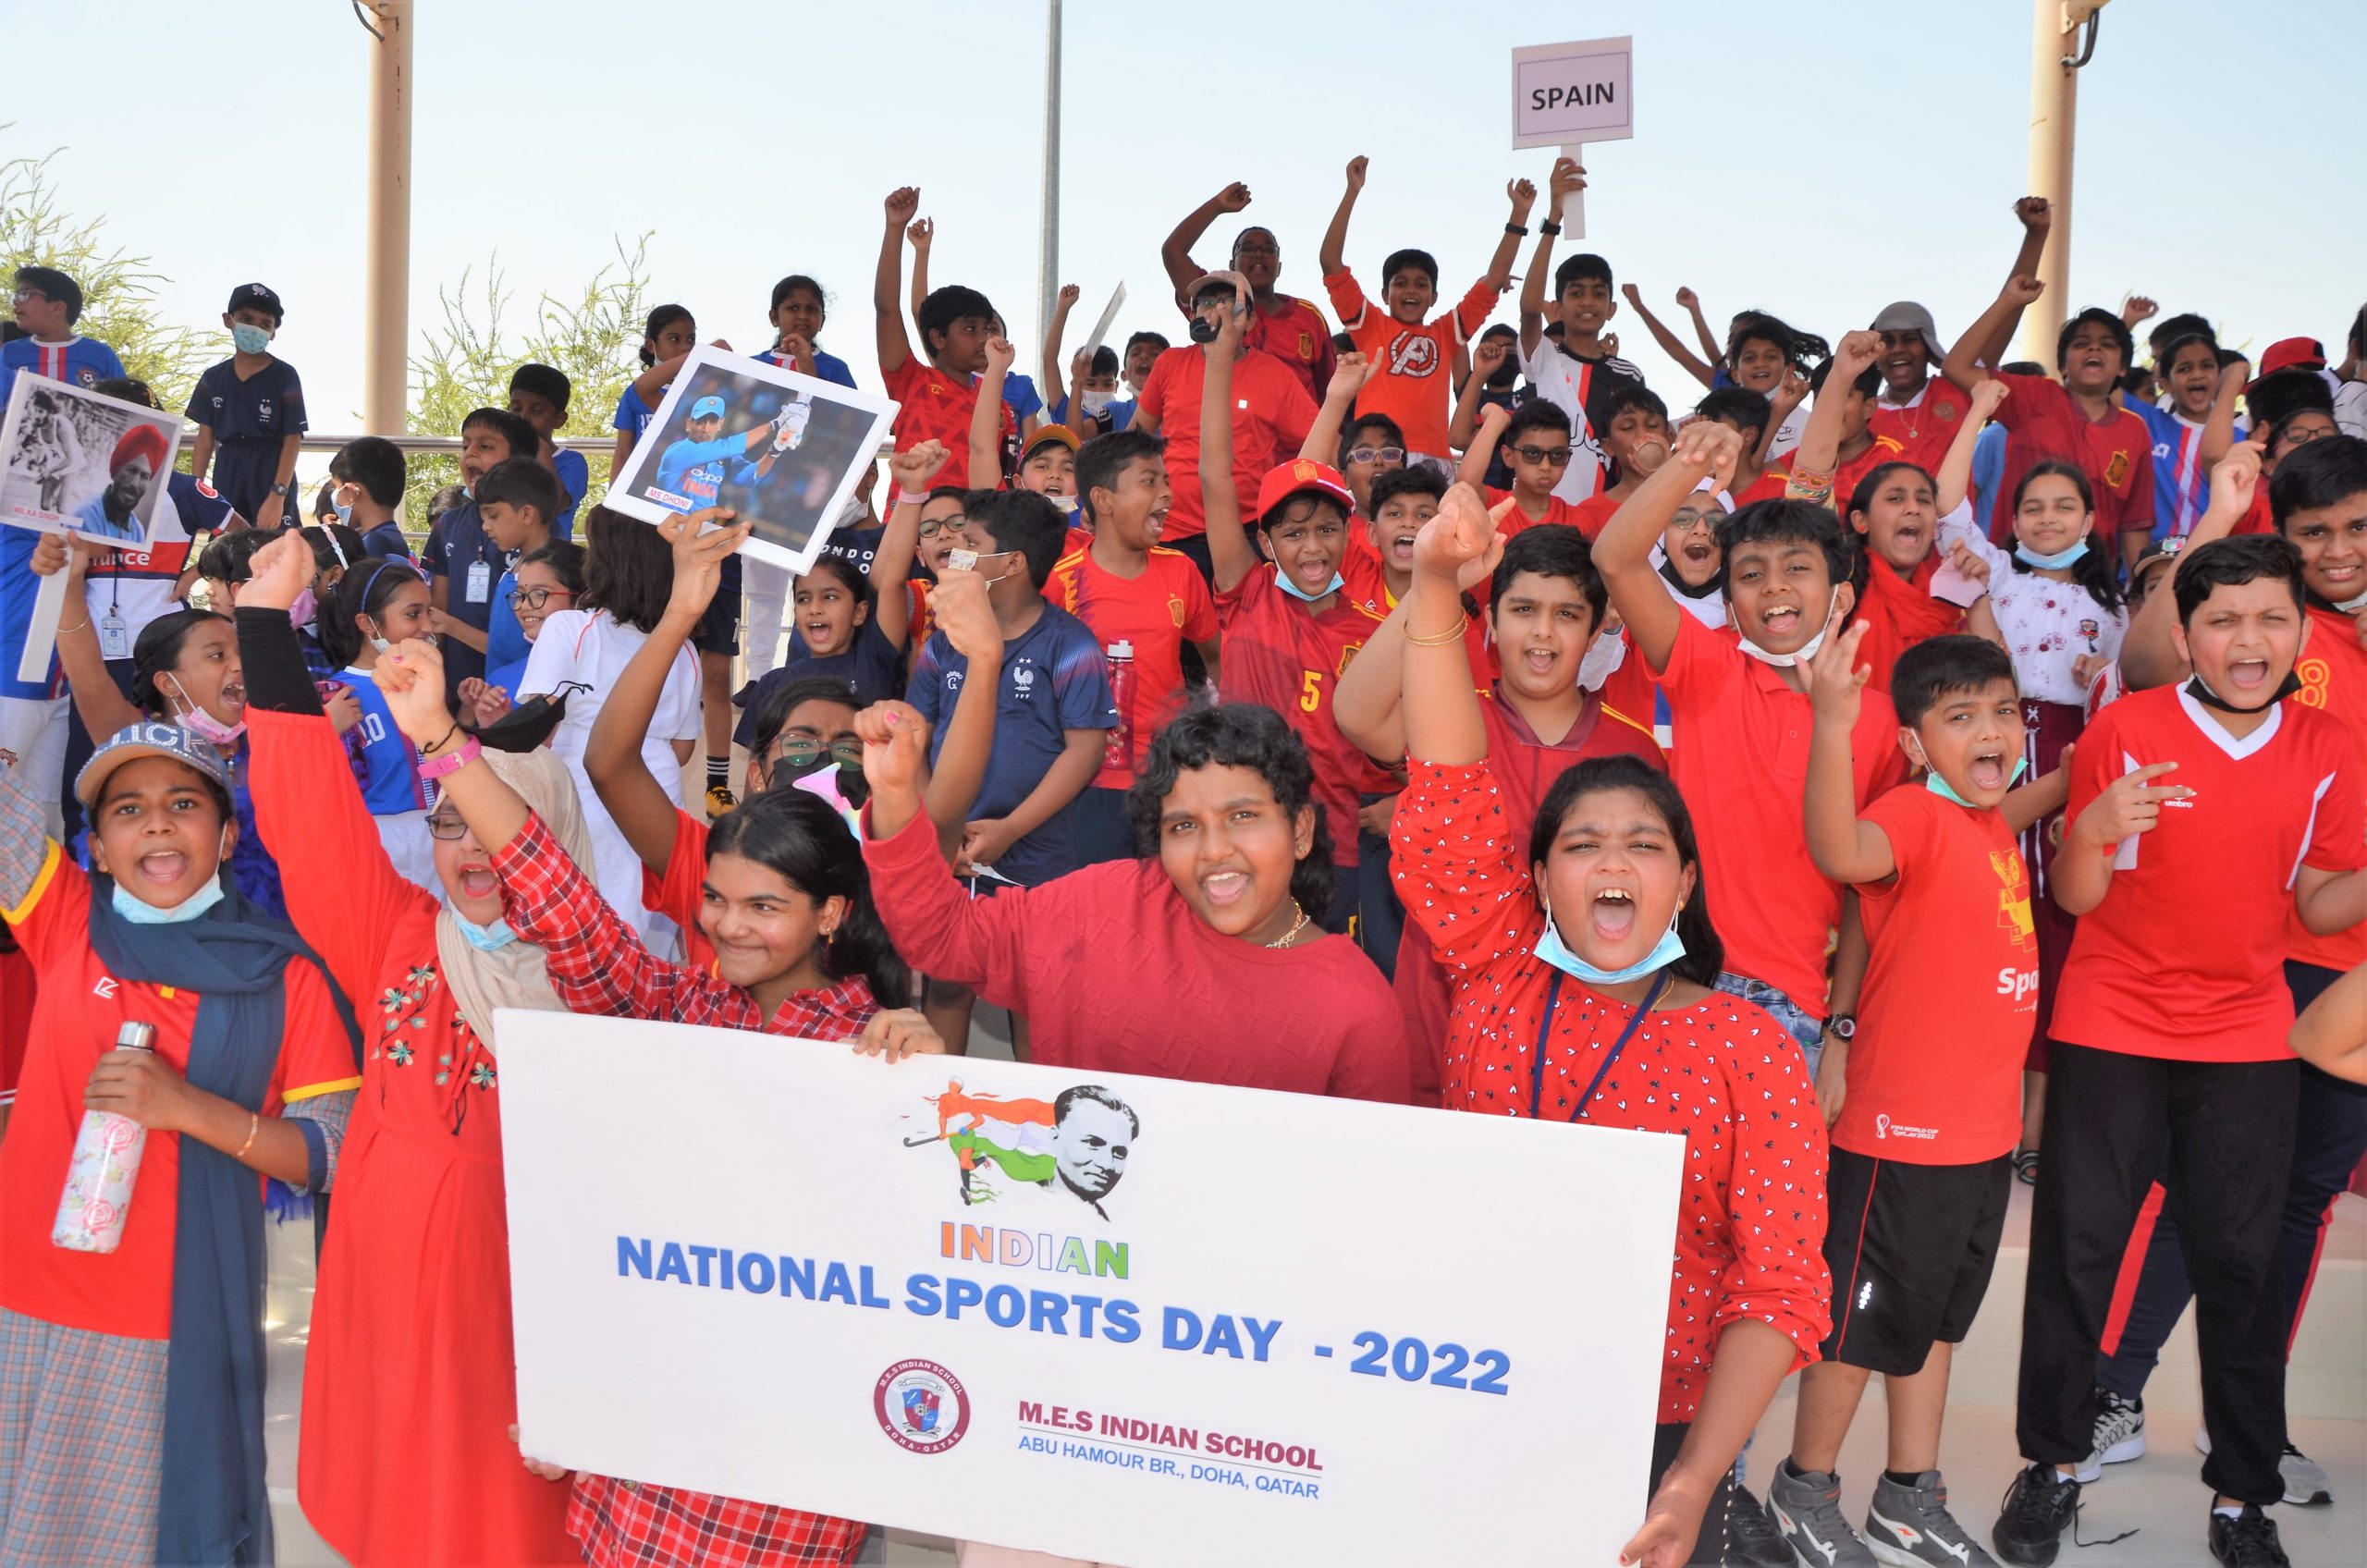 INDIAN NATIONAL SPORTS DAY